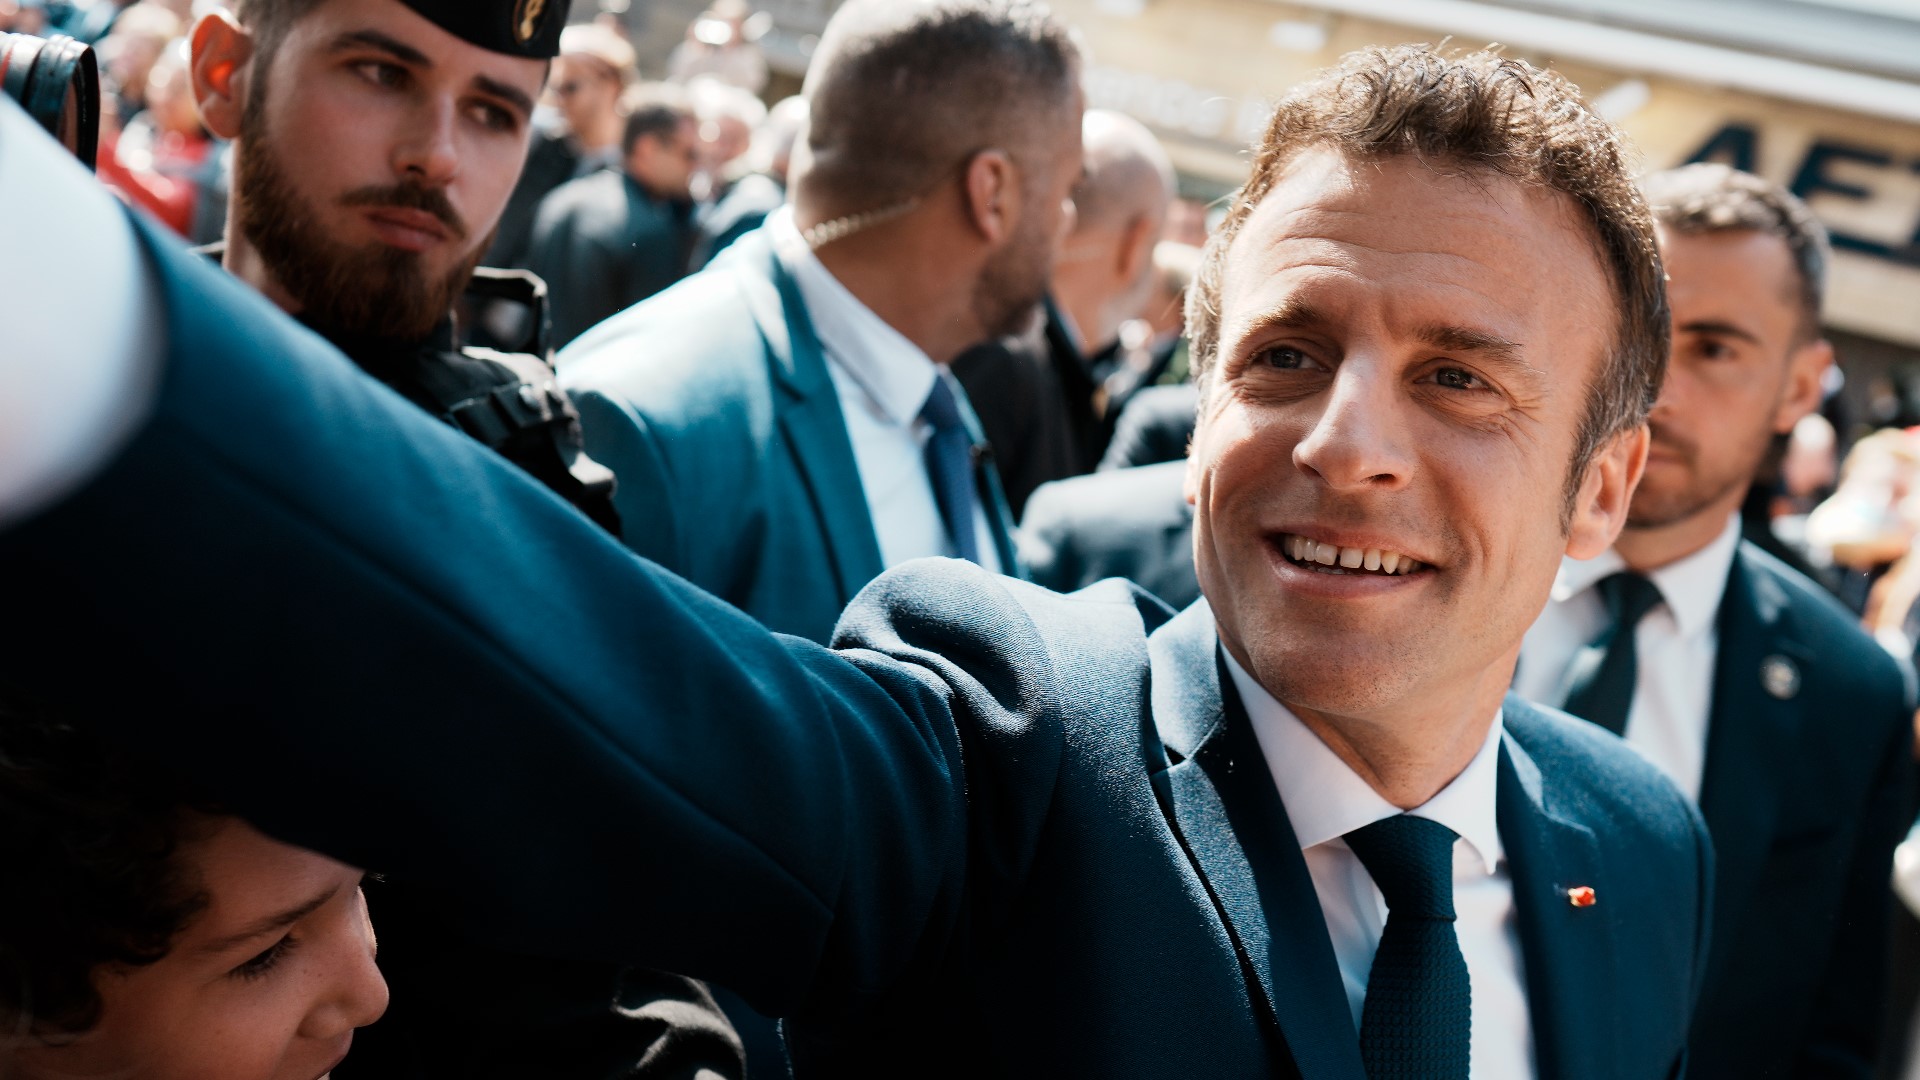 French President Emmanuel Macron wins a second term. And, Joel Tyrone Zeigler, 31, was arrested on suspicion of killing a man and injuring three other people.